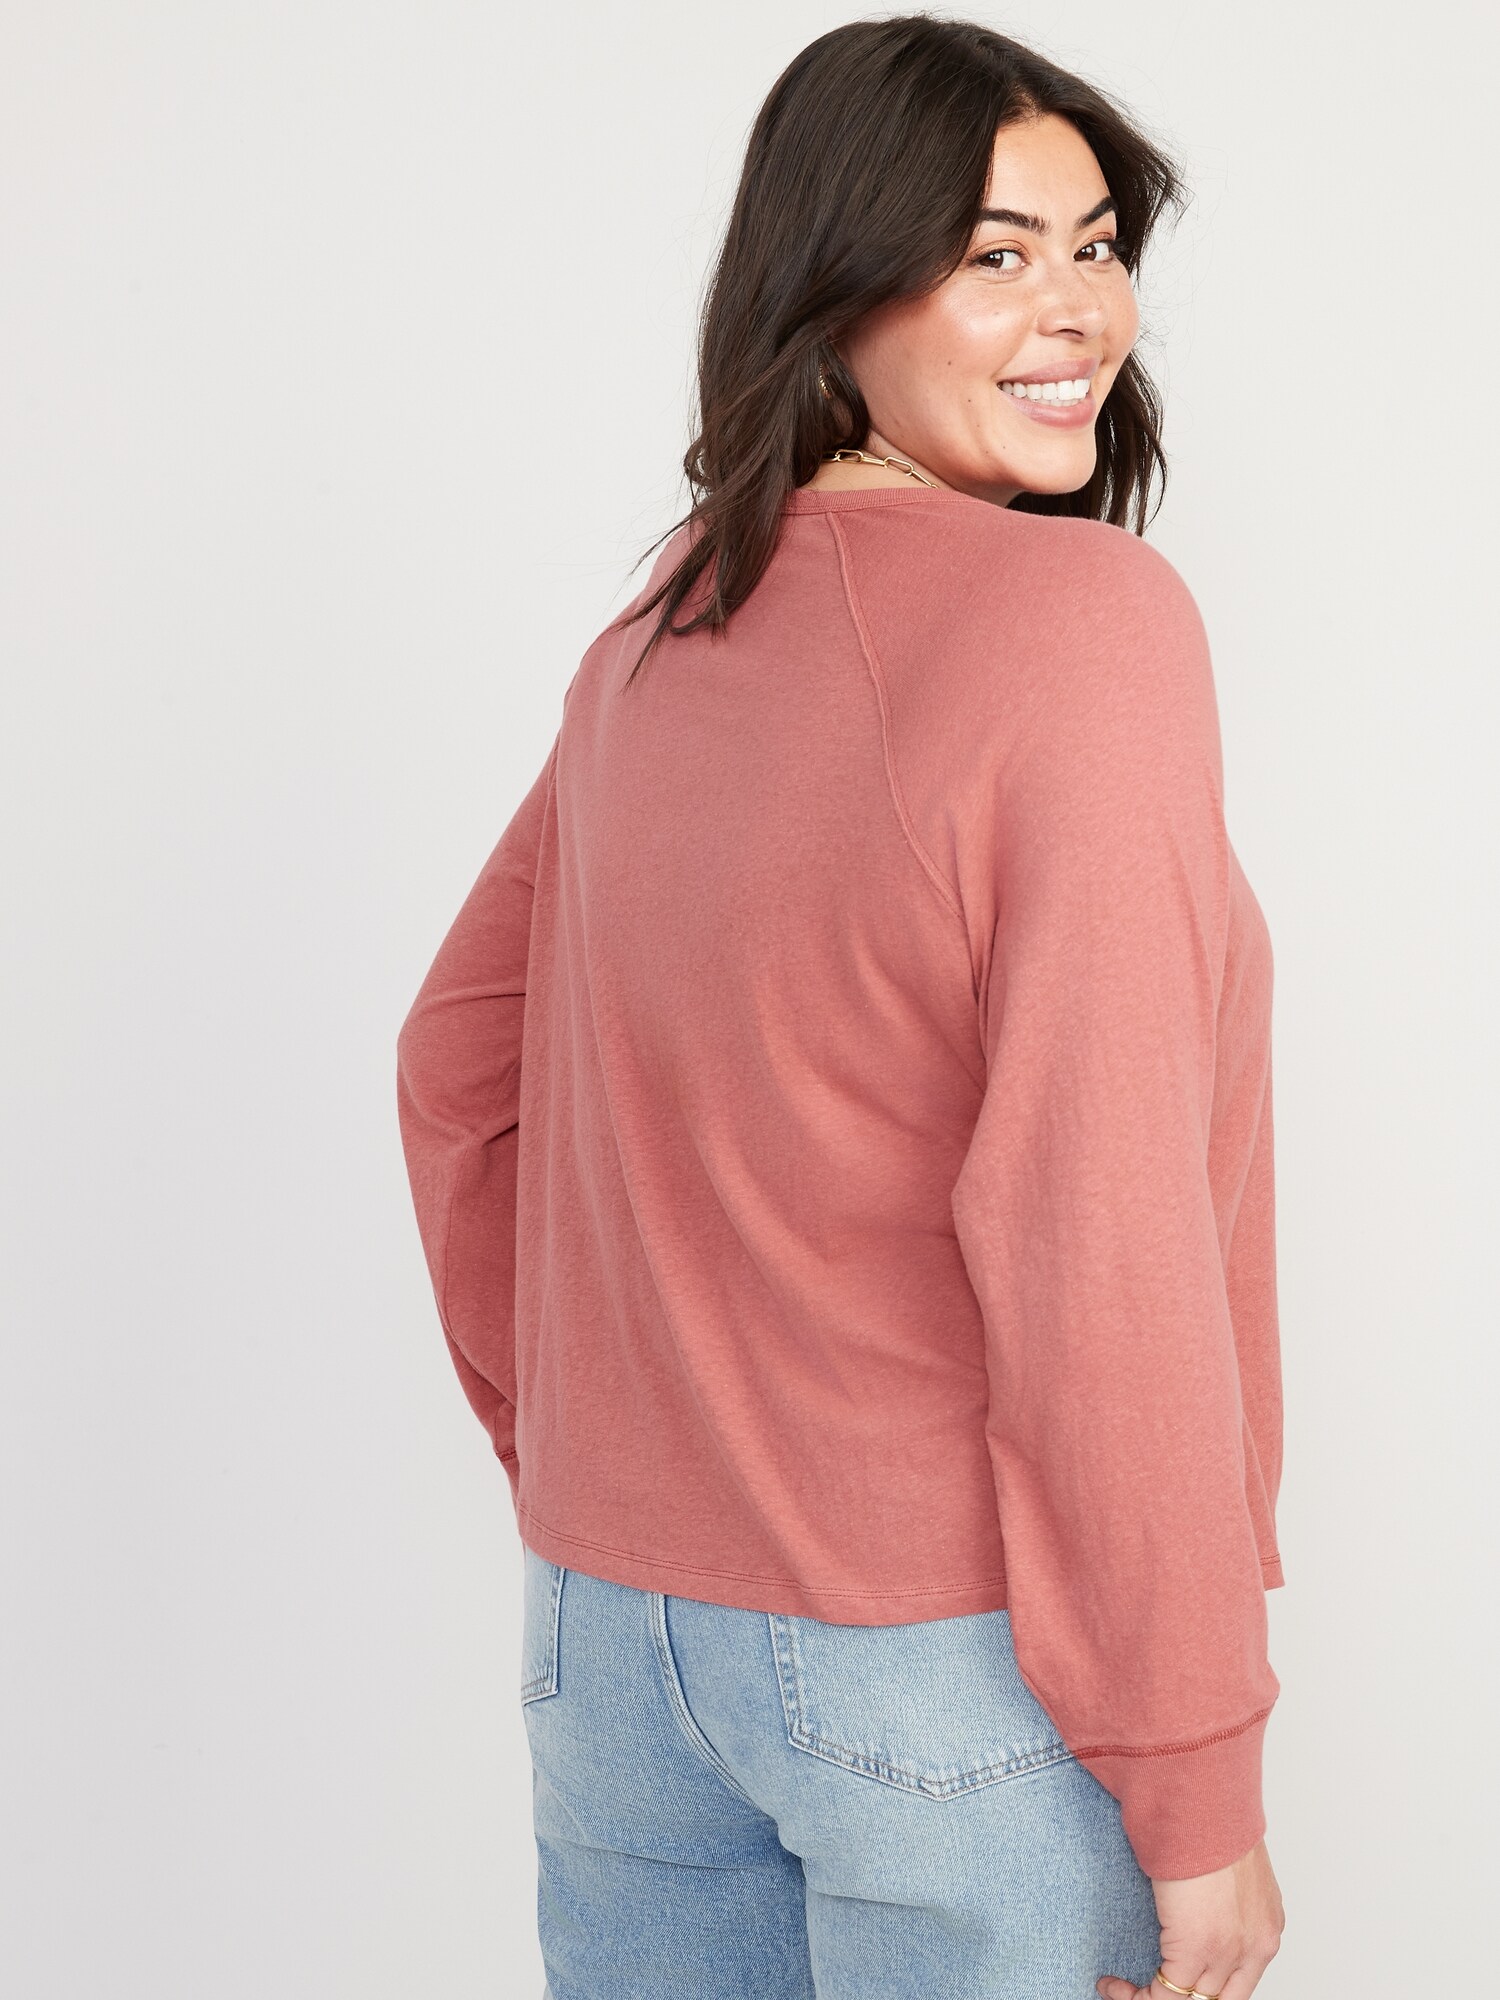 OLD NAVY Women's PLUS Size 4X Loose Garment-Dyed Long-Sleeve Henley T-Shirt